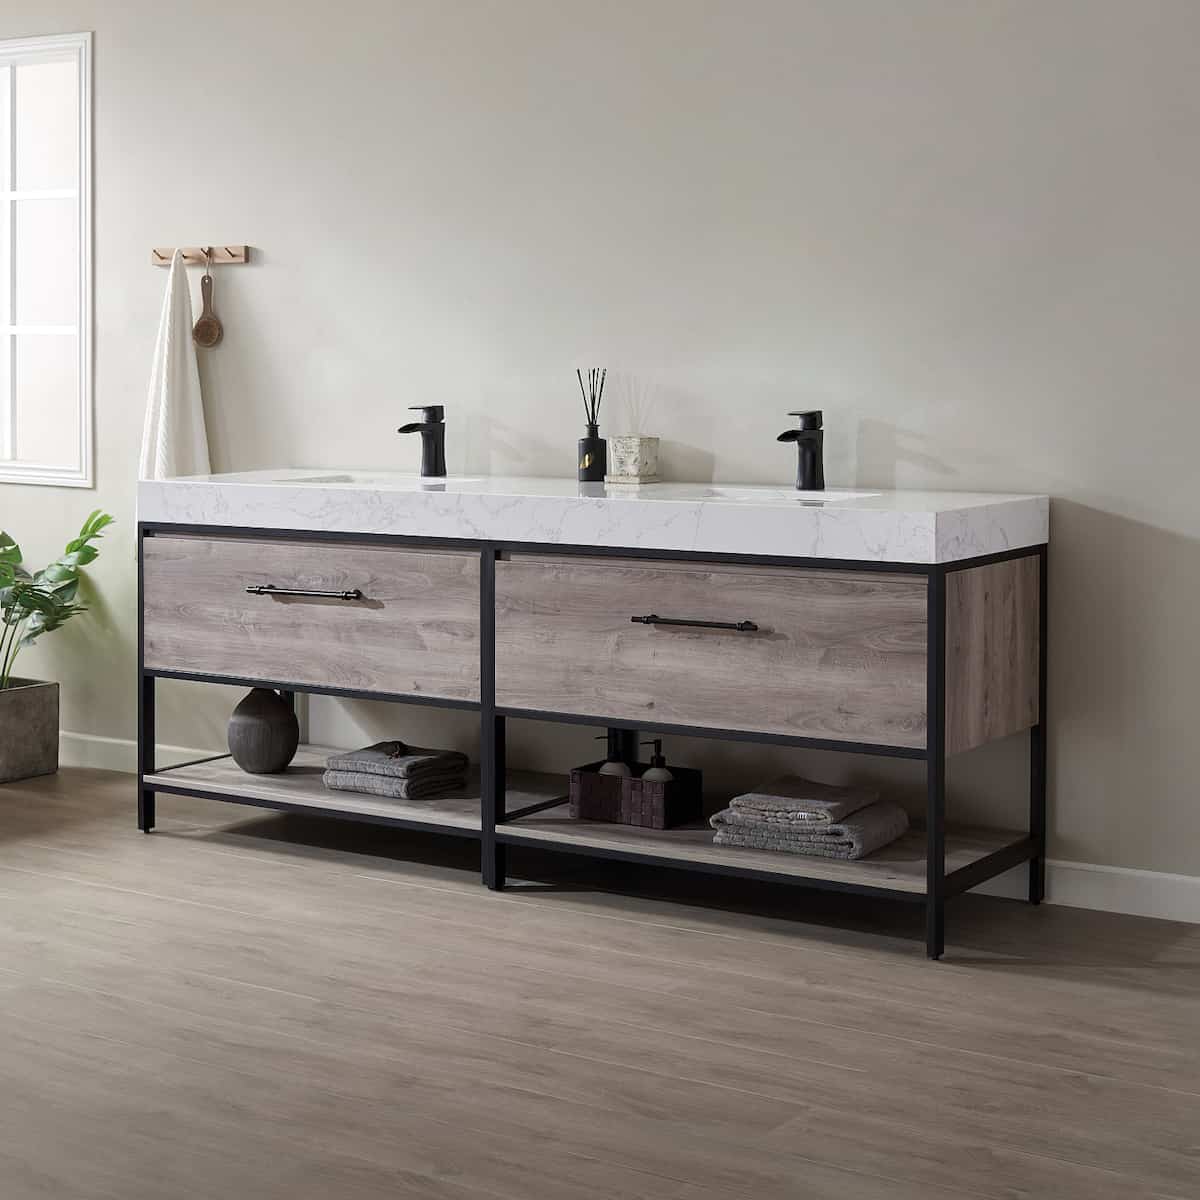 Vinnova Palma 84 Inch Freestanding Double Vanity in Mexican Oak with White Composite Grain Stone Countertop Without Mirrors Side 701284-MXO-GW-NM